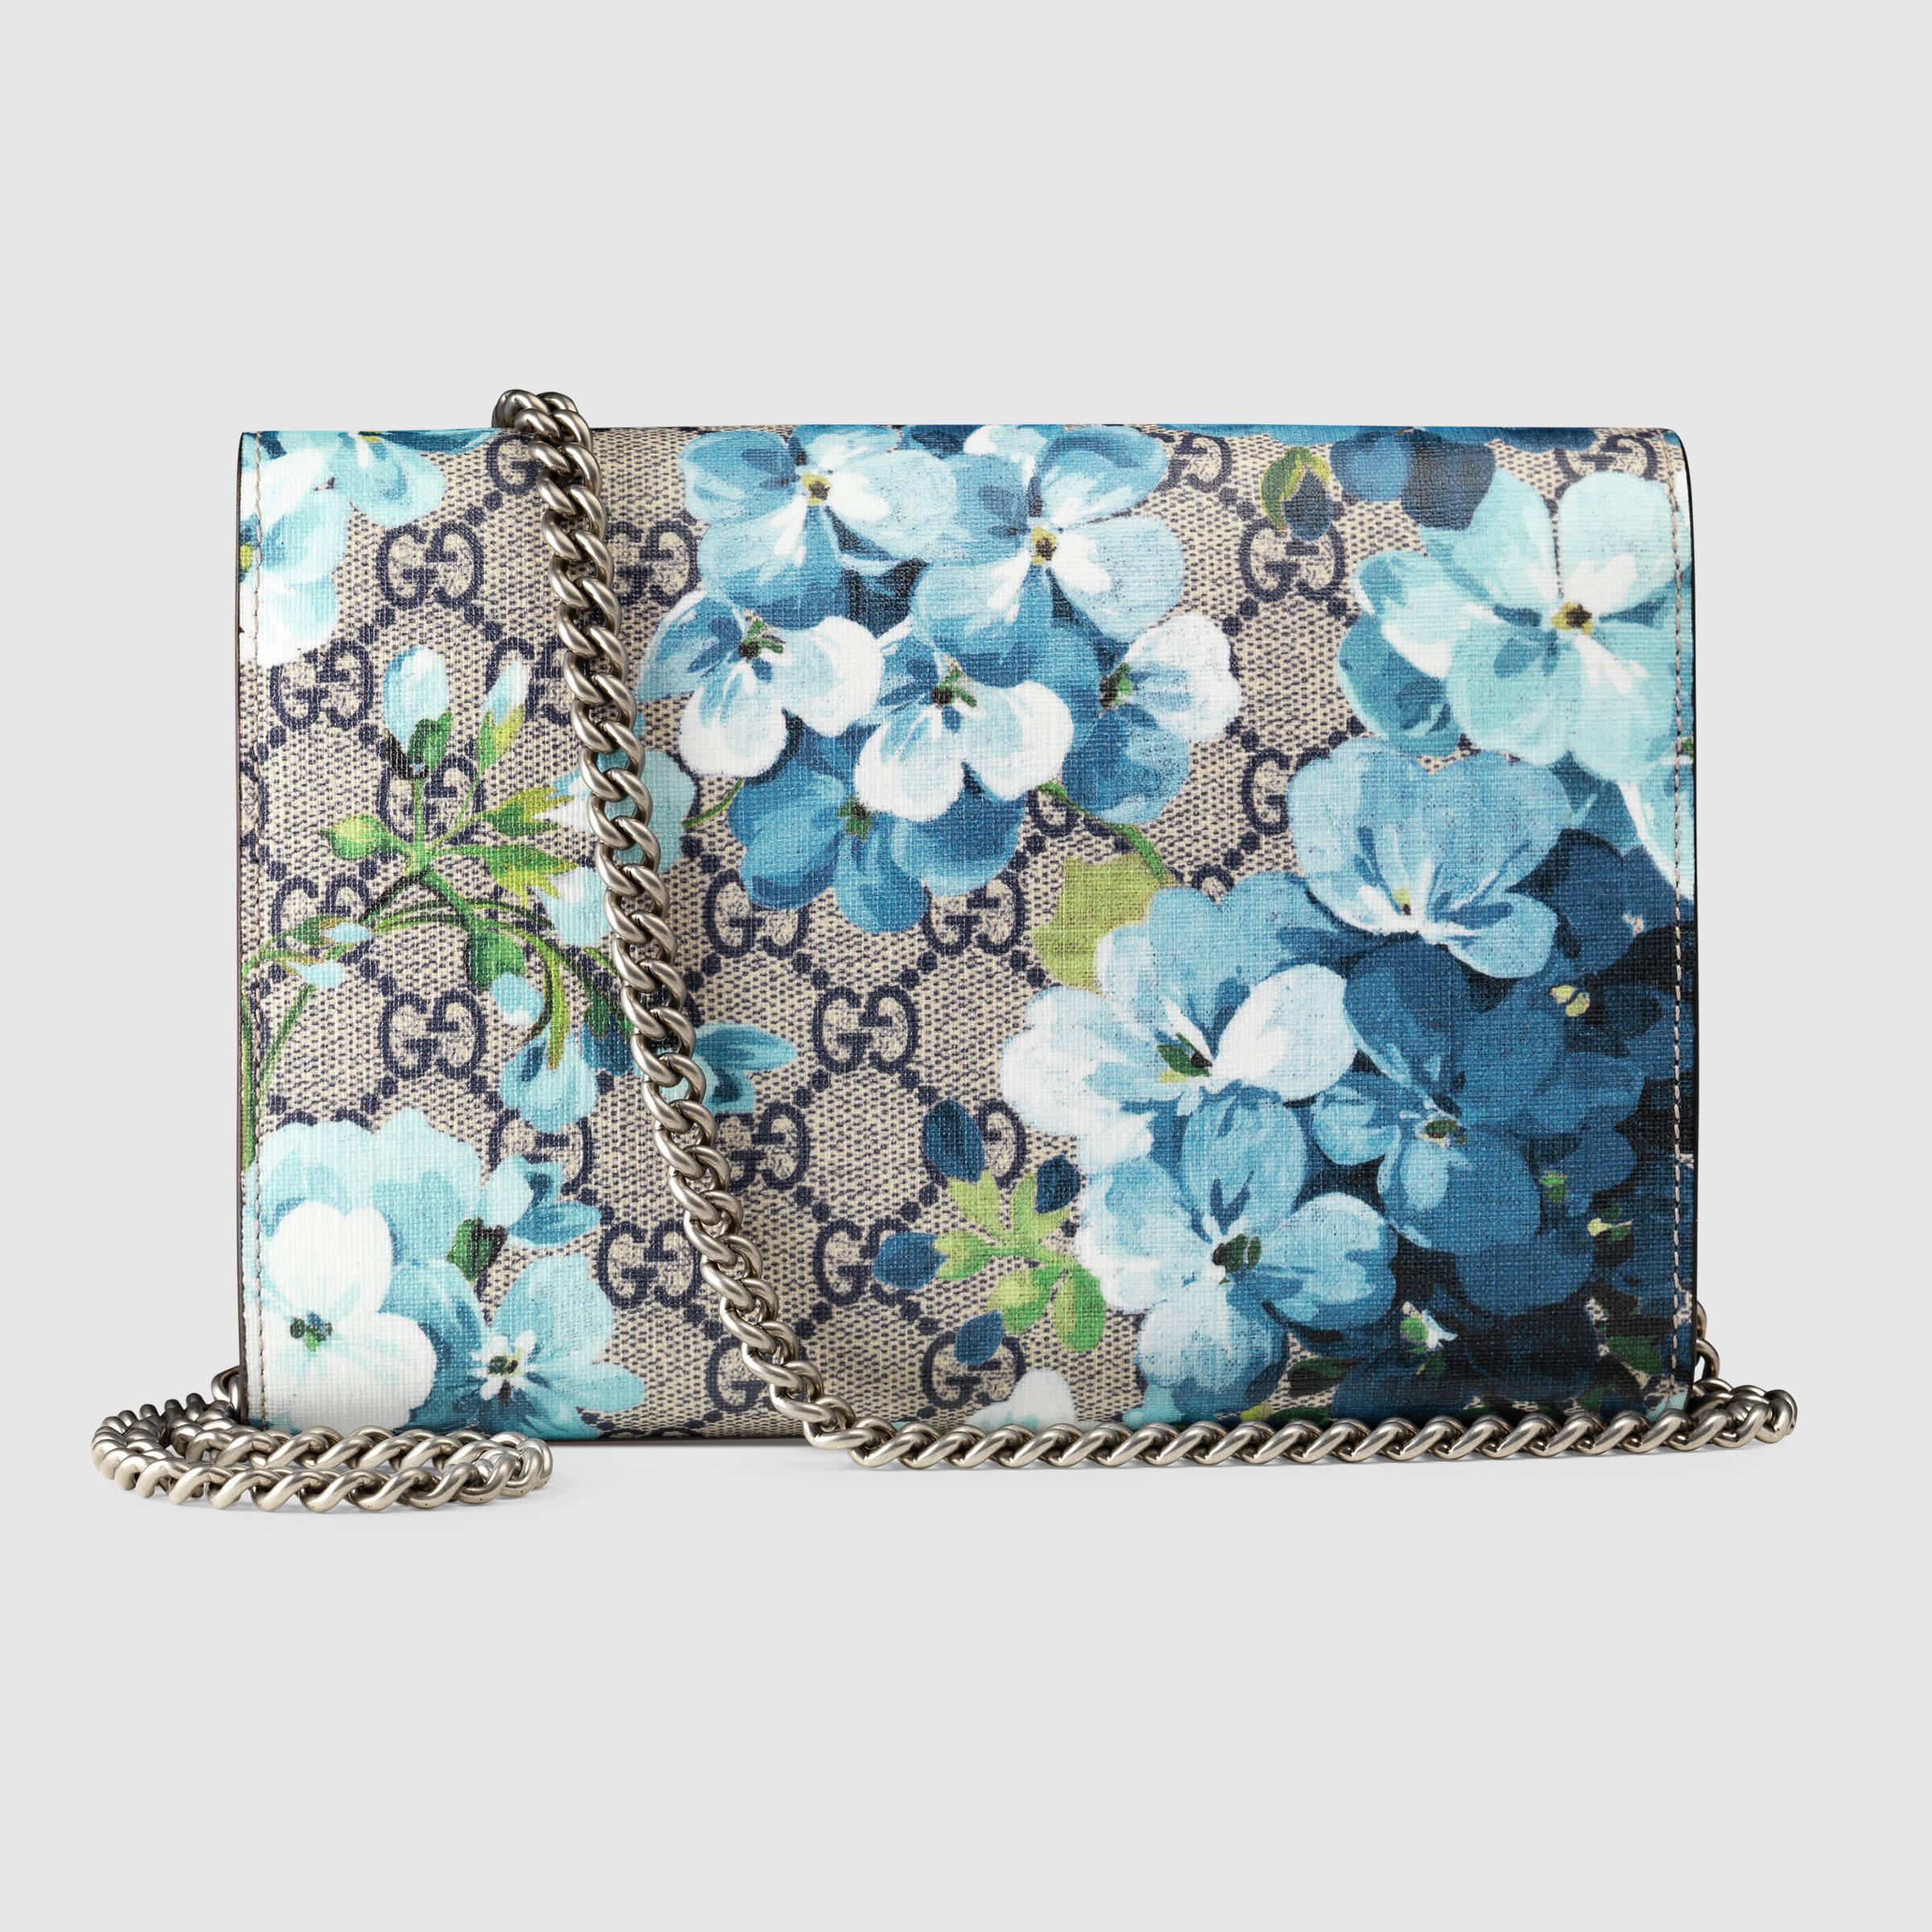 Lyst - Gucci Dionysus Blooms Mini Canvas And Leather Chain Bag in Blue